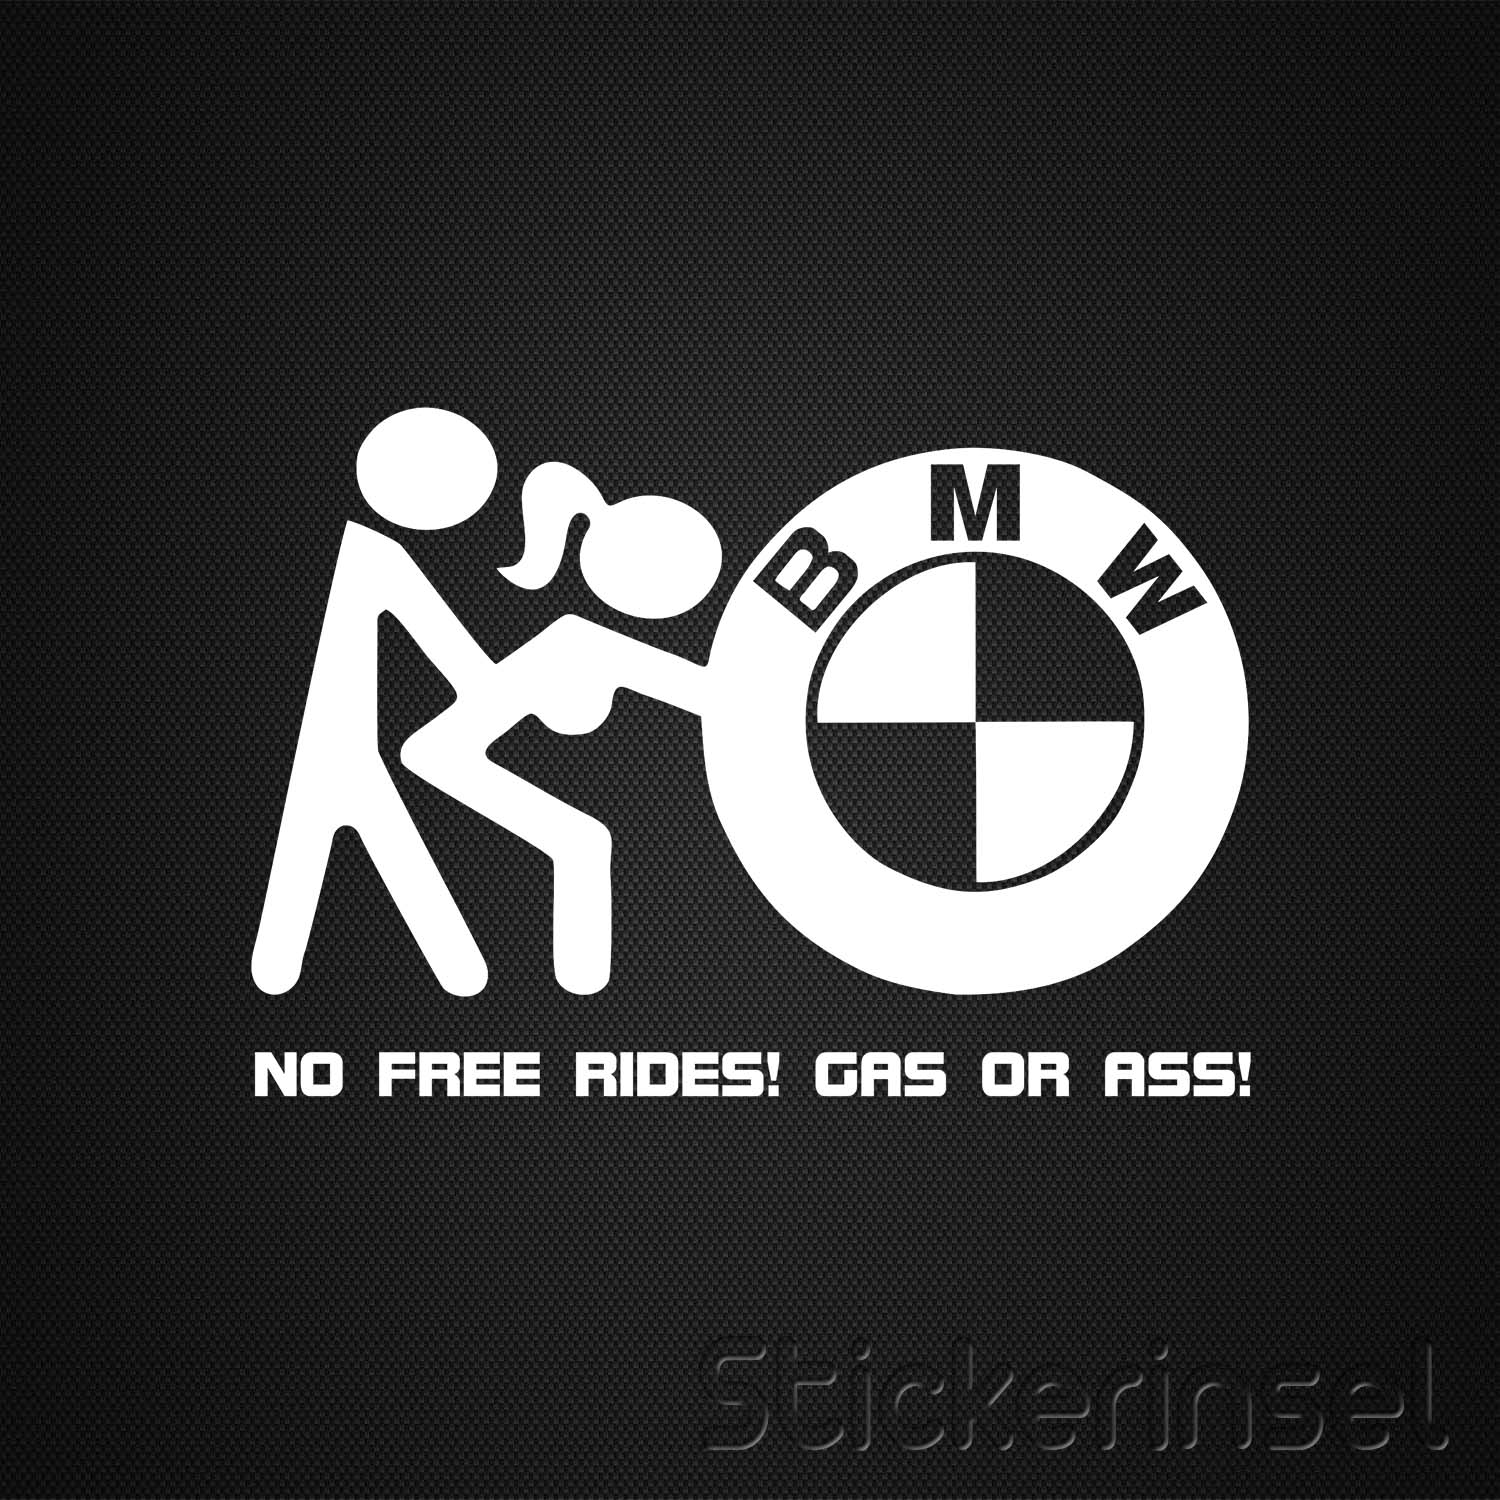 BMW - No free rides gas or ass !